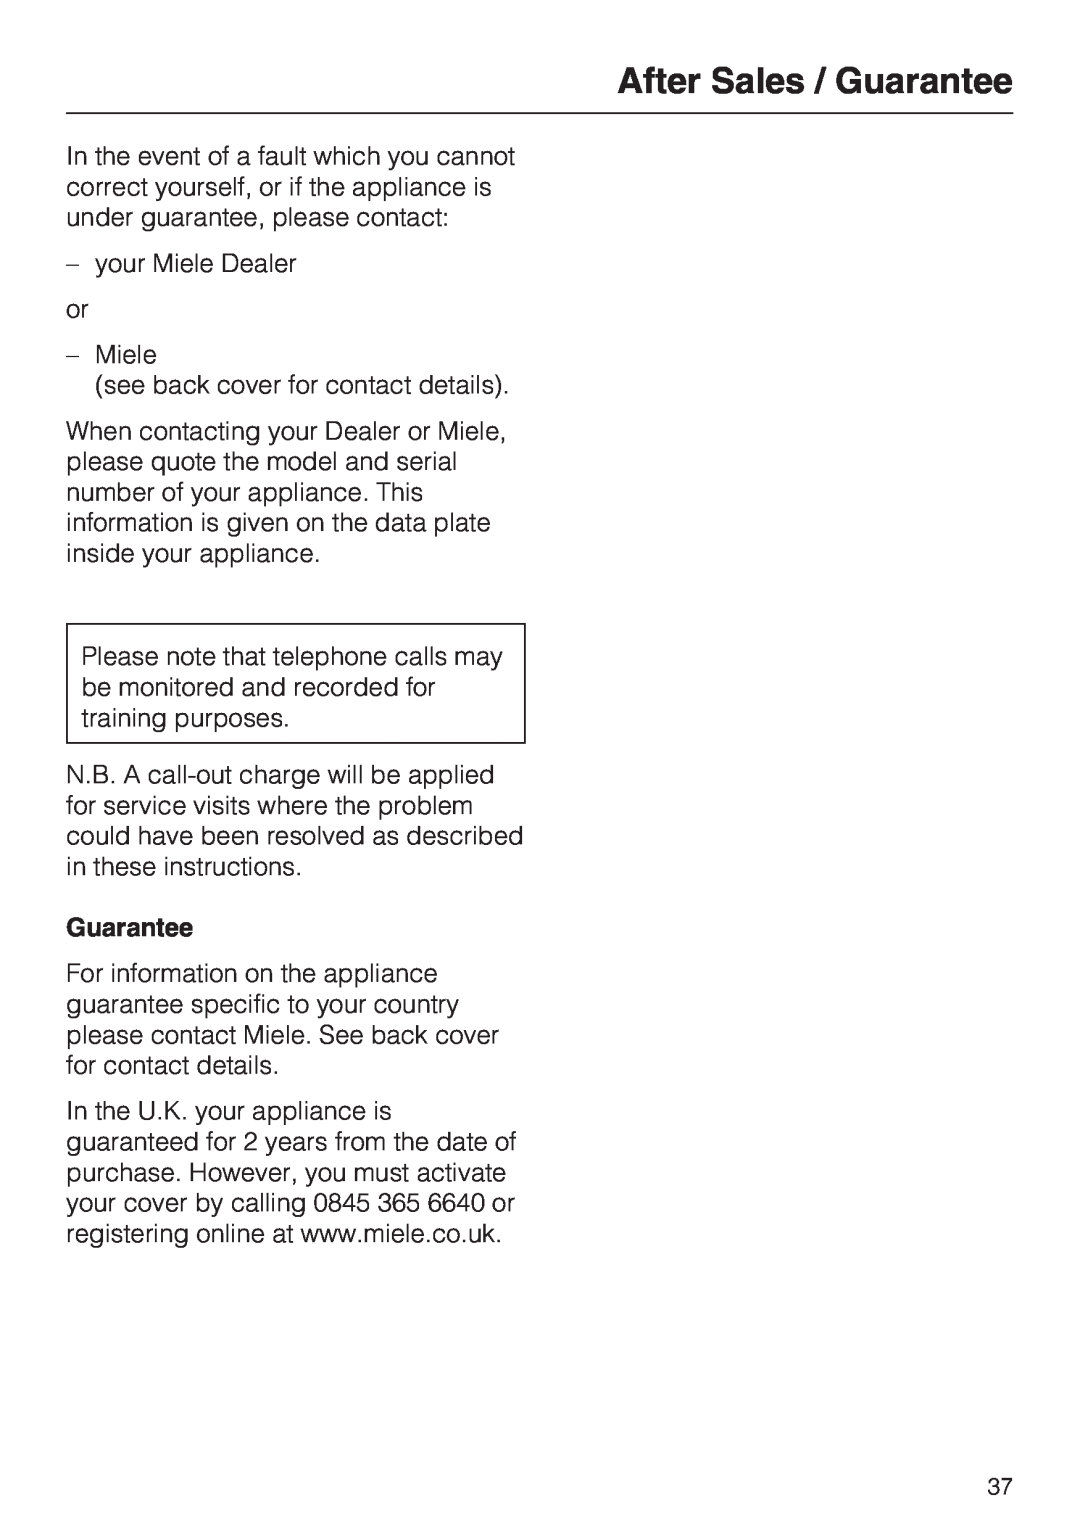 Miele KDN 12623 S-1/-2 installation instructions After Sales / Guarantee 